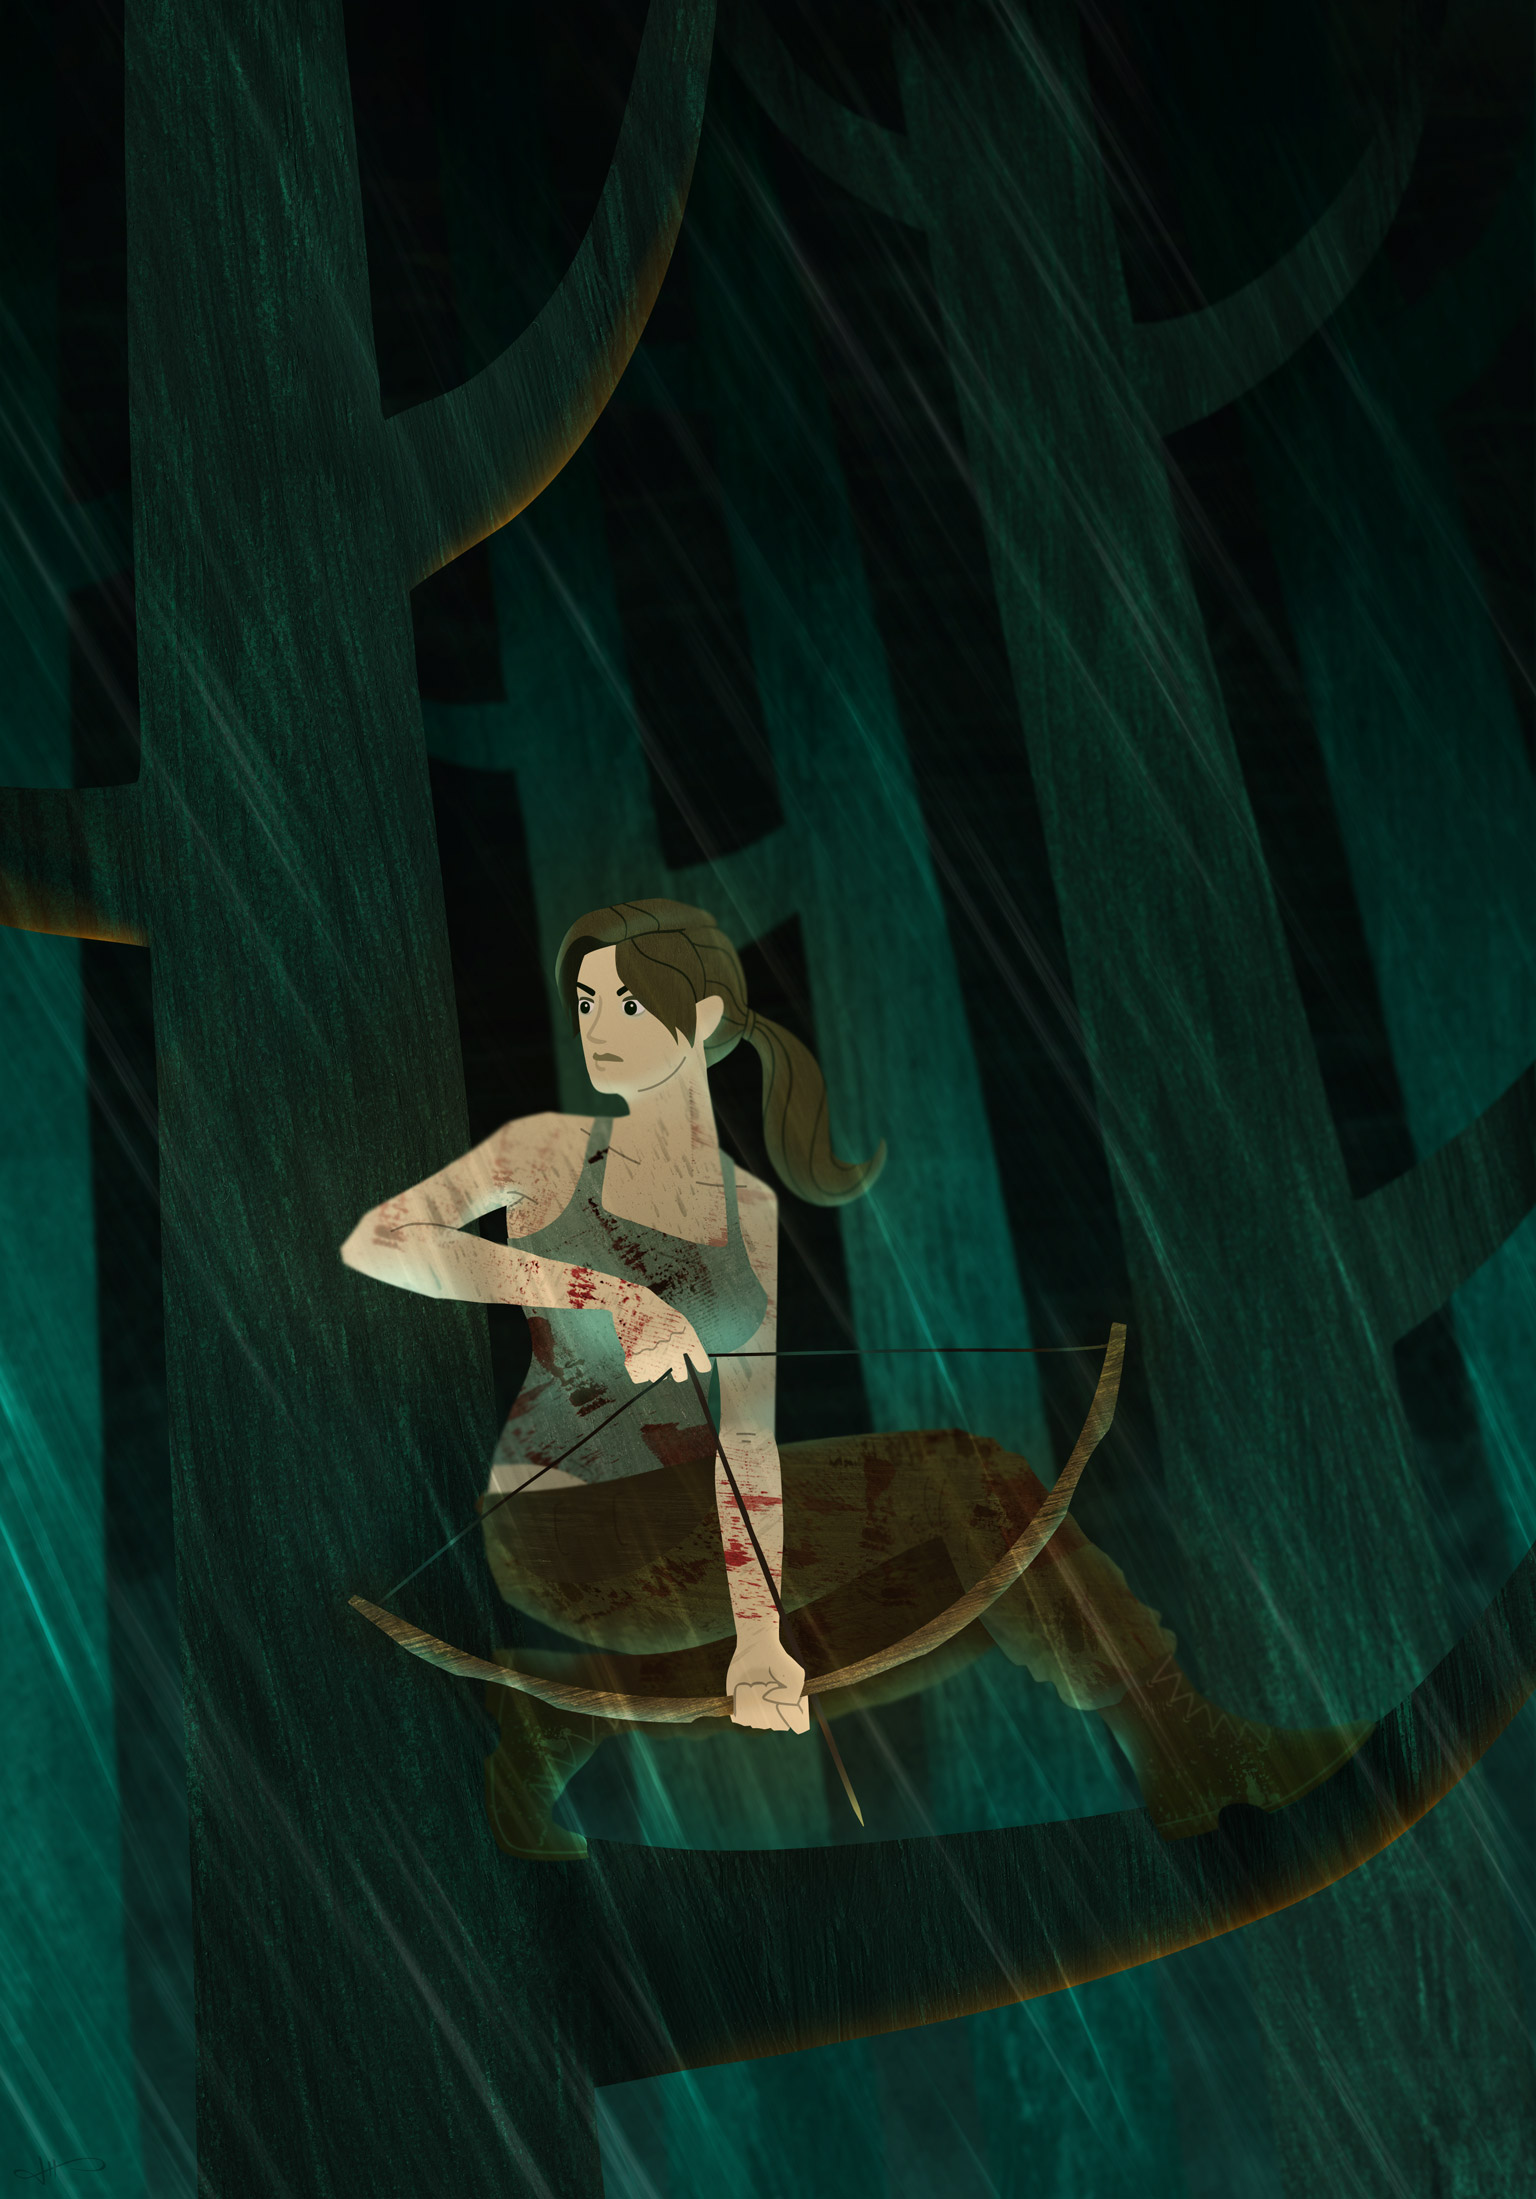 Illustration of Lara Croft crouching on a tree branch in the rain holding a bow and arrow.